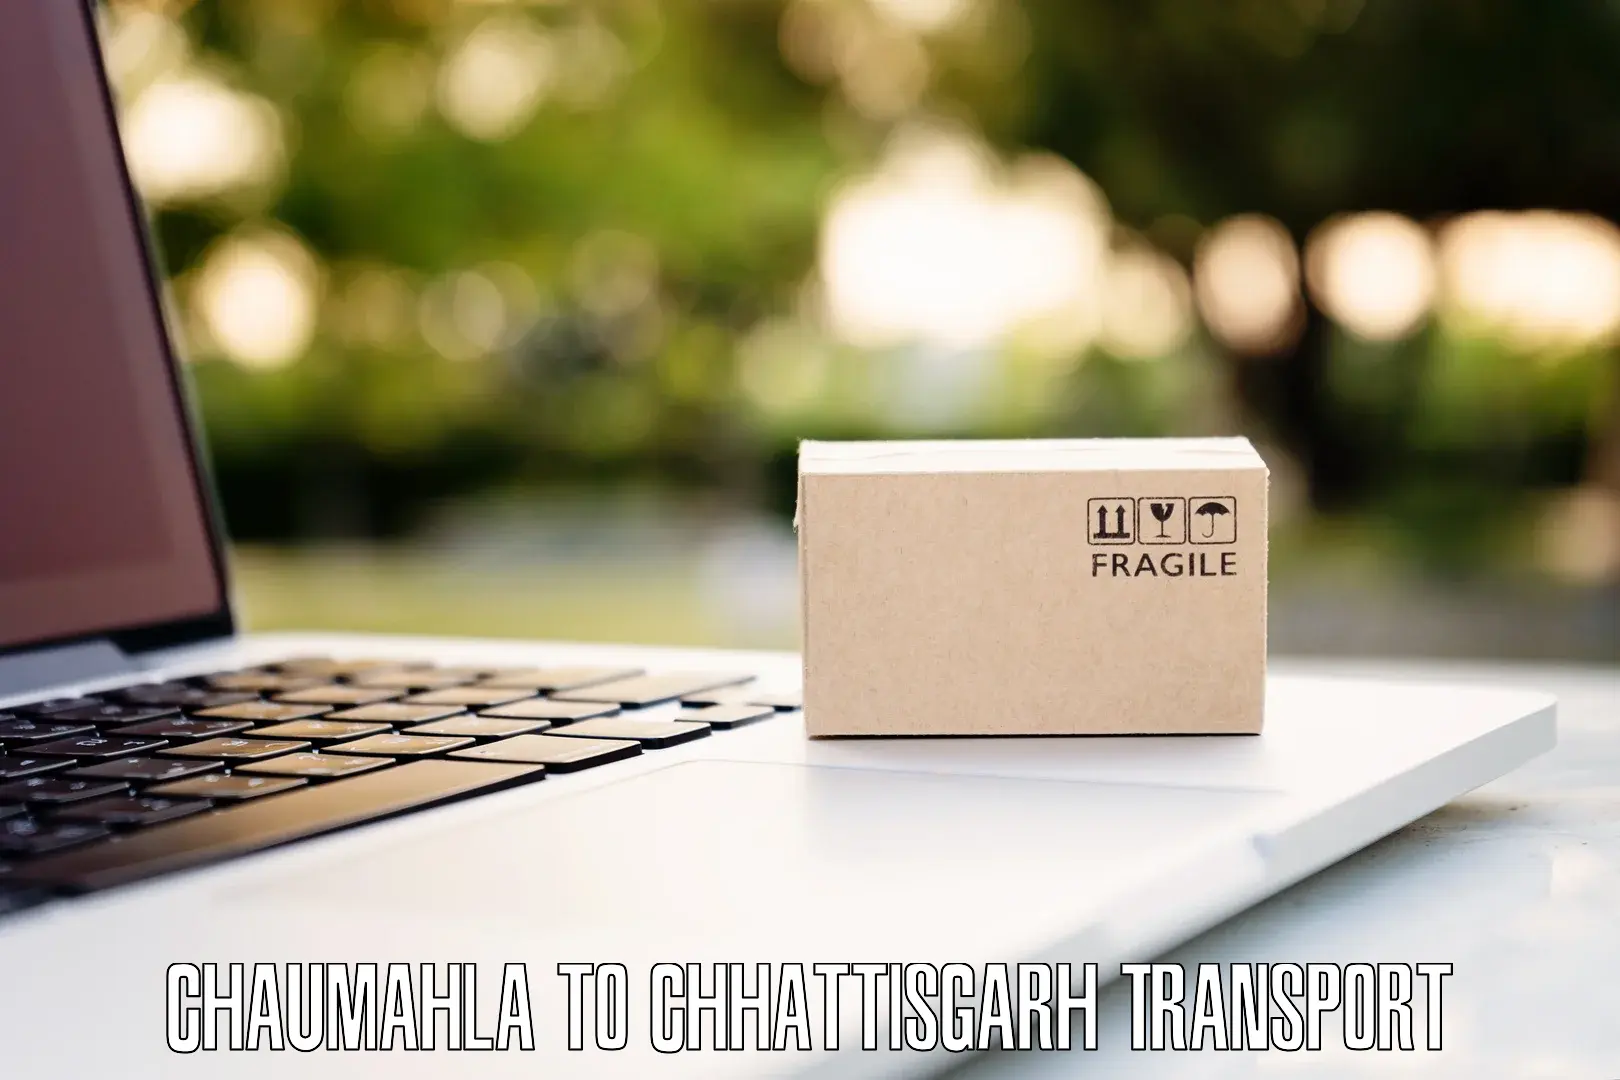 Online transport Chaumahla to Dongargarh